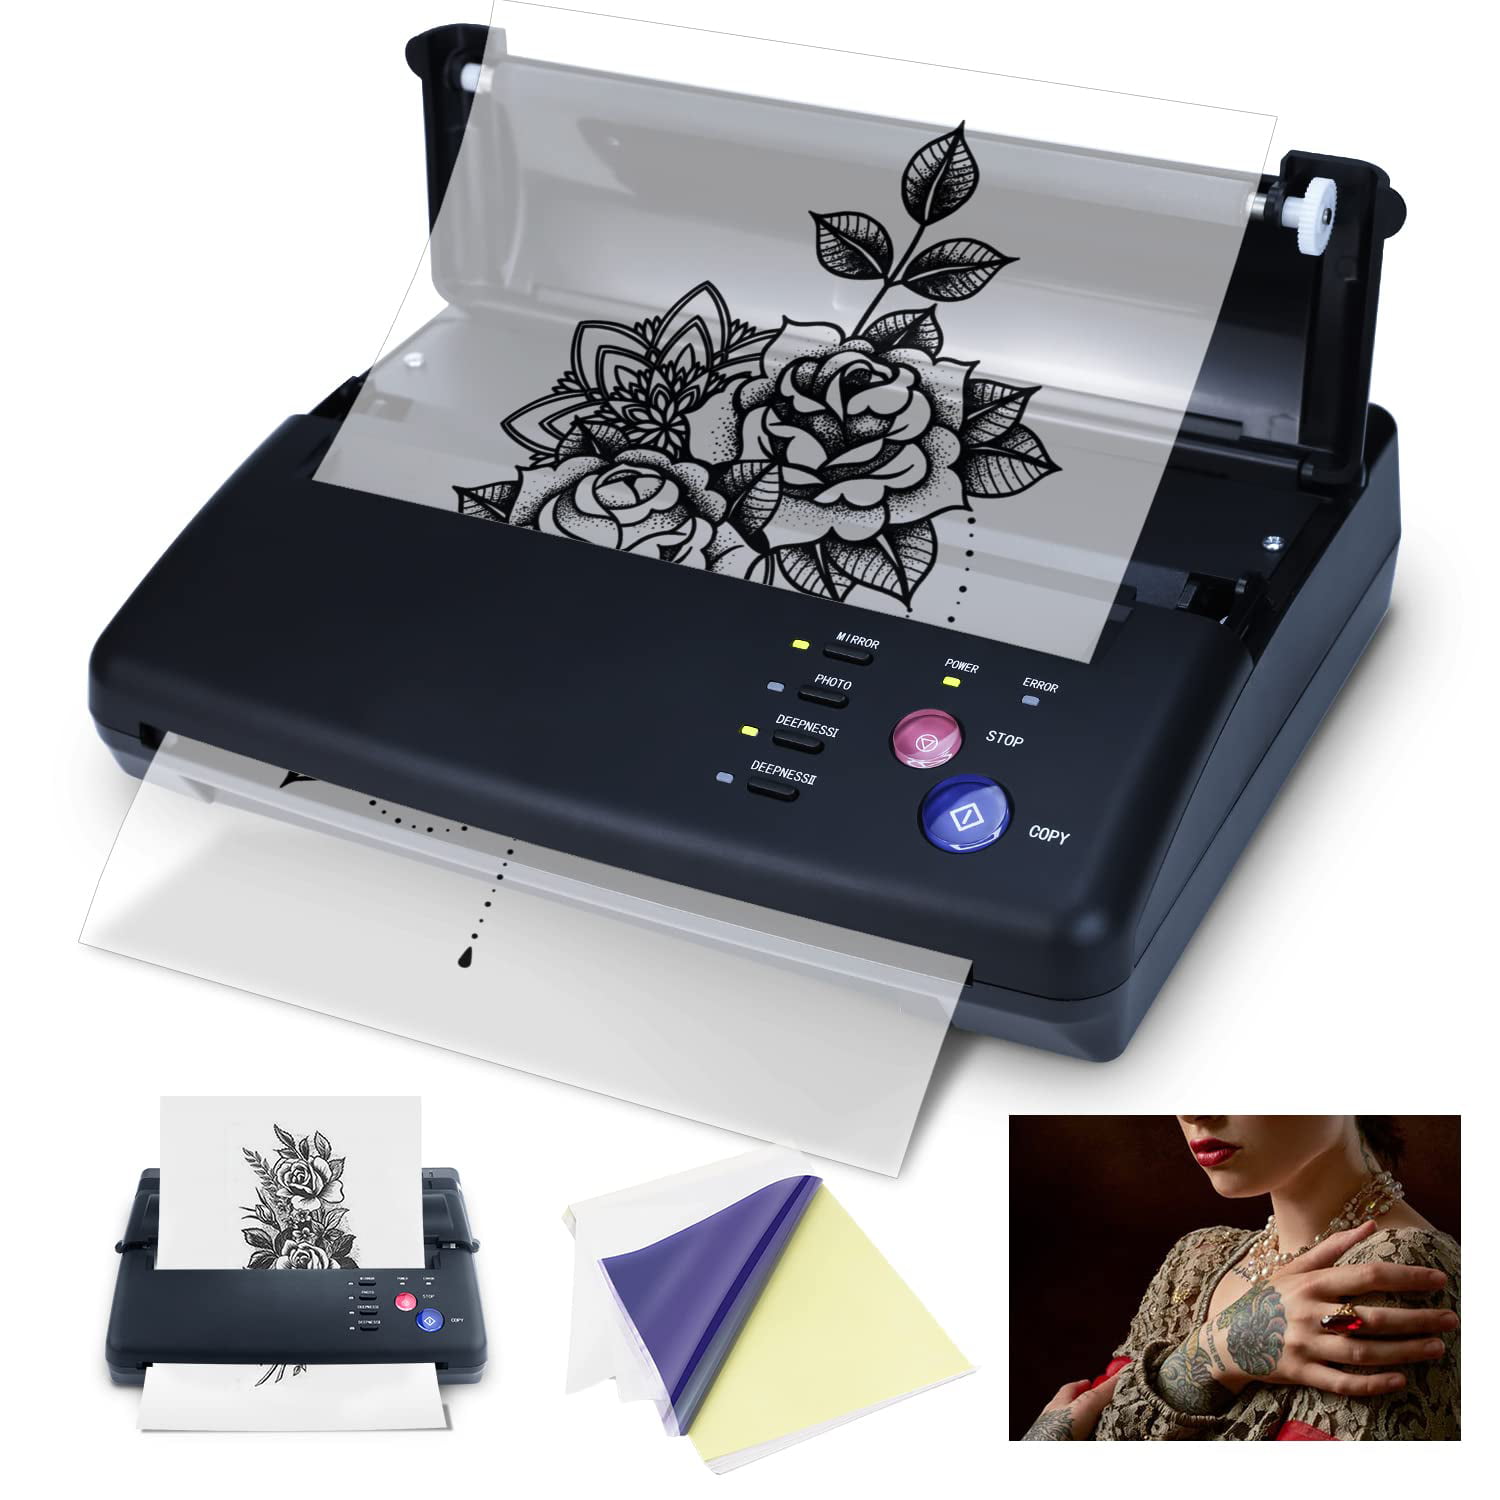 FSROLTPI Tattoo Stencil Printer, With Free 20PCS Transfer Paper, Thermal  Copier Machine for Tattoo Transfer Temporary and Permanent Tattoos,Black -  